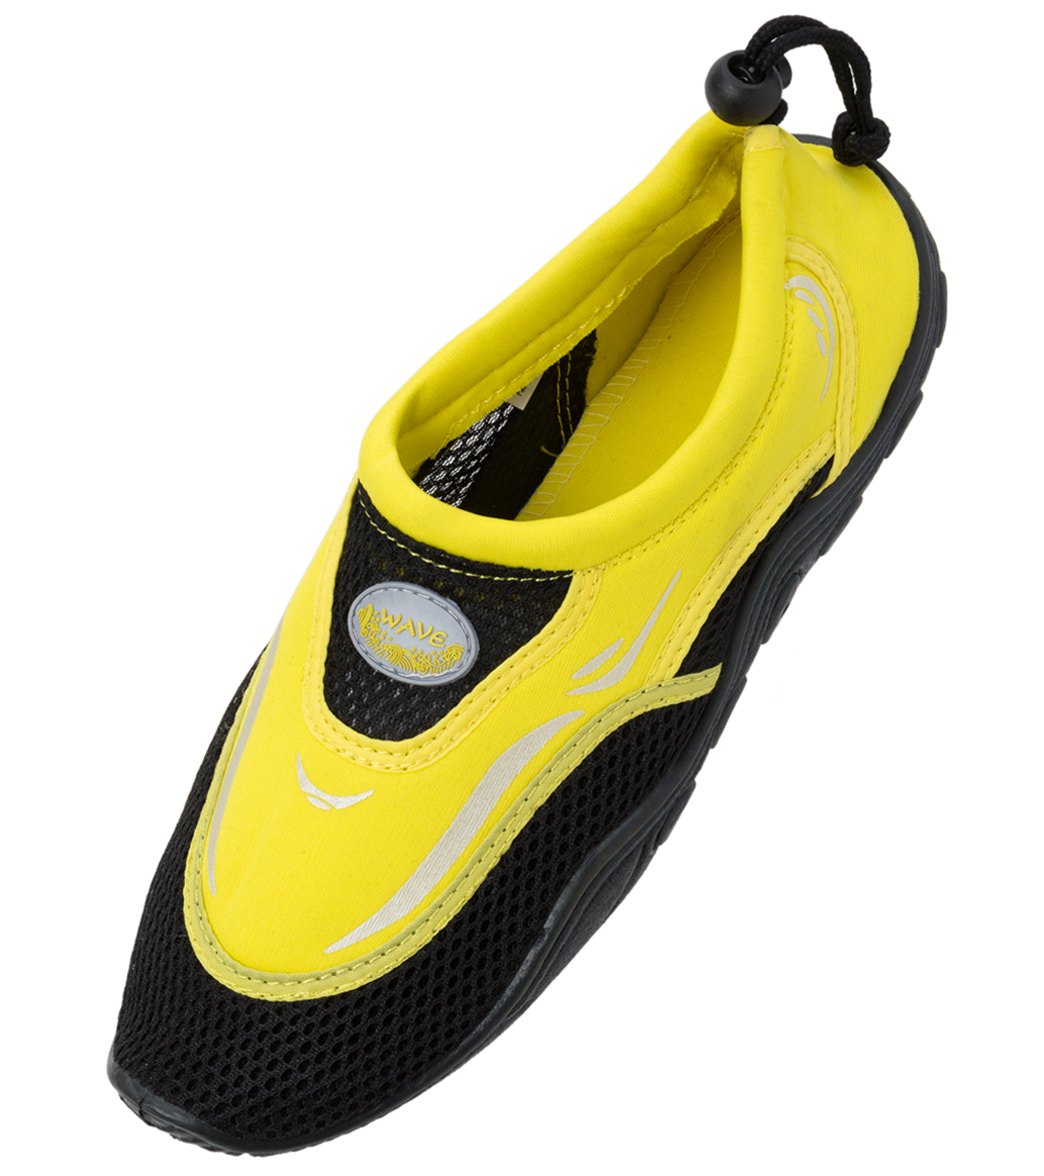 Easy Usa Men's Water Shoes - Black/Yellow 7 - Swimoutlet.com